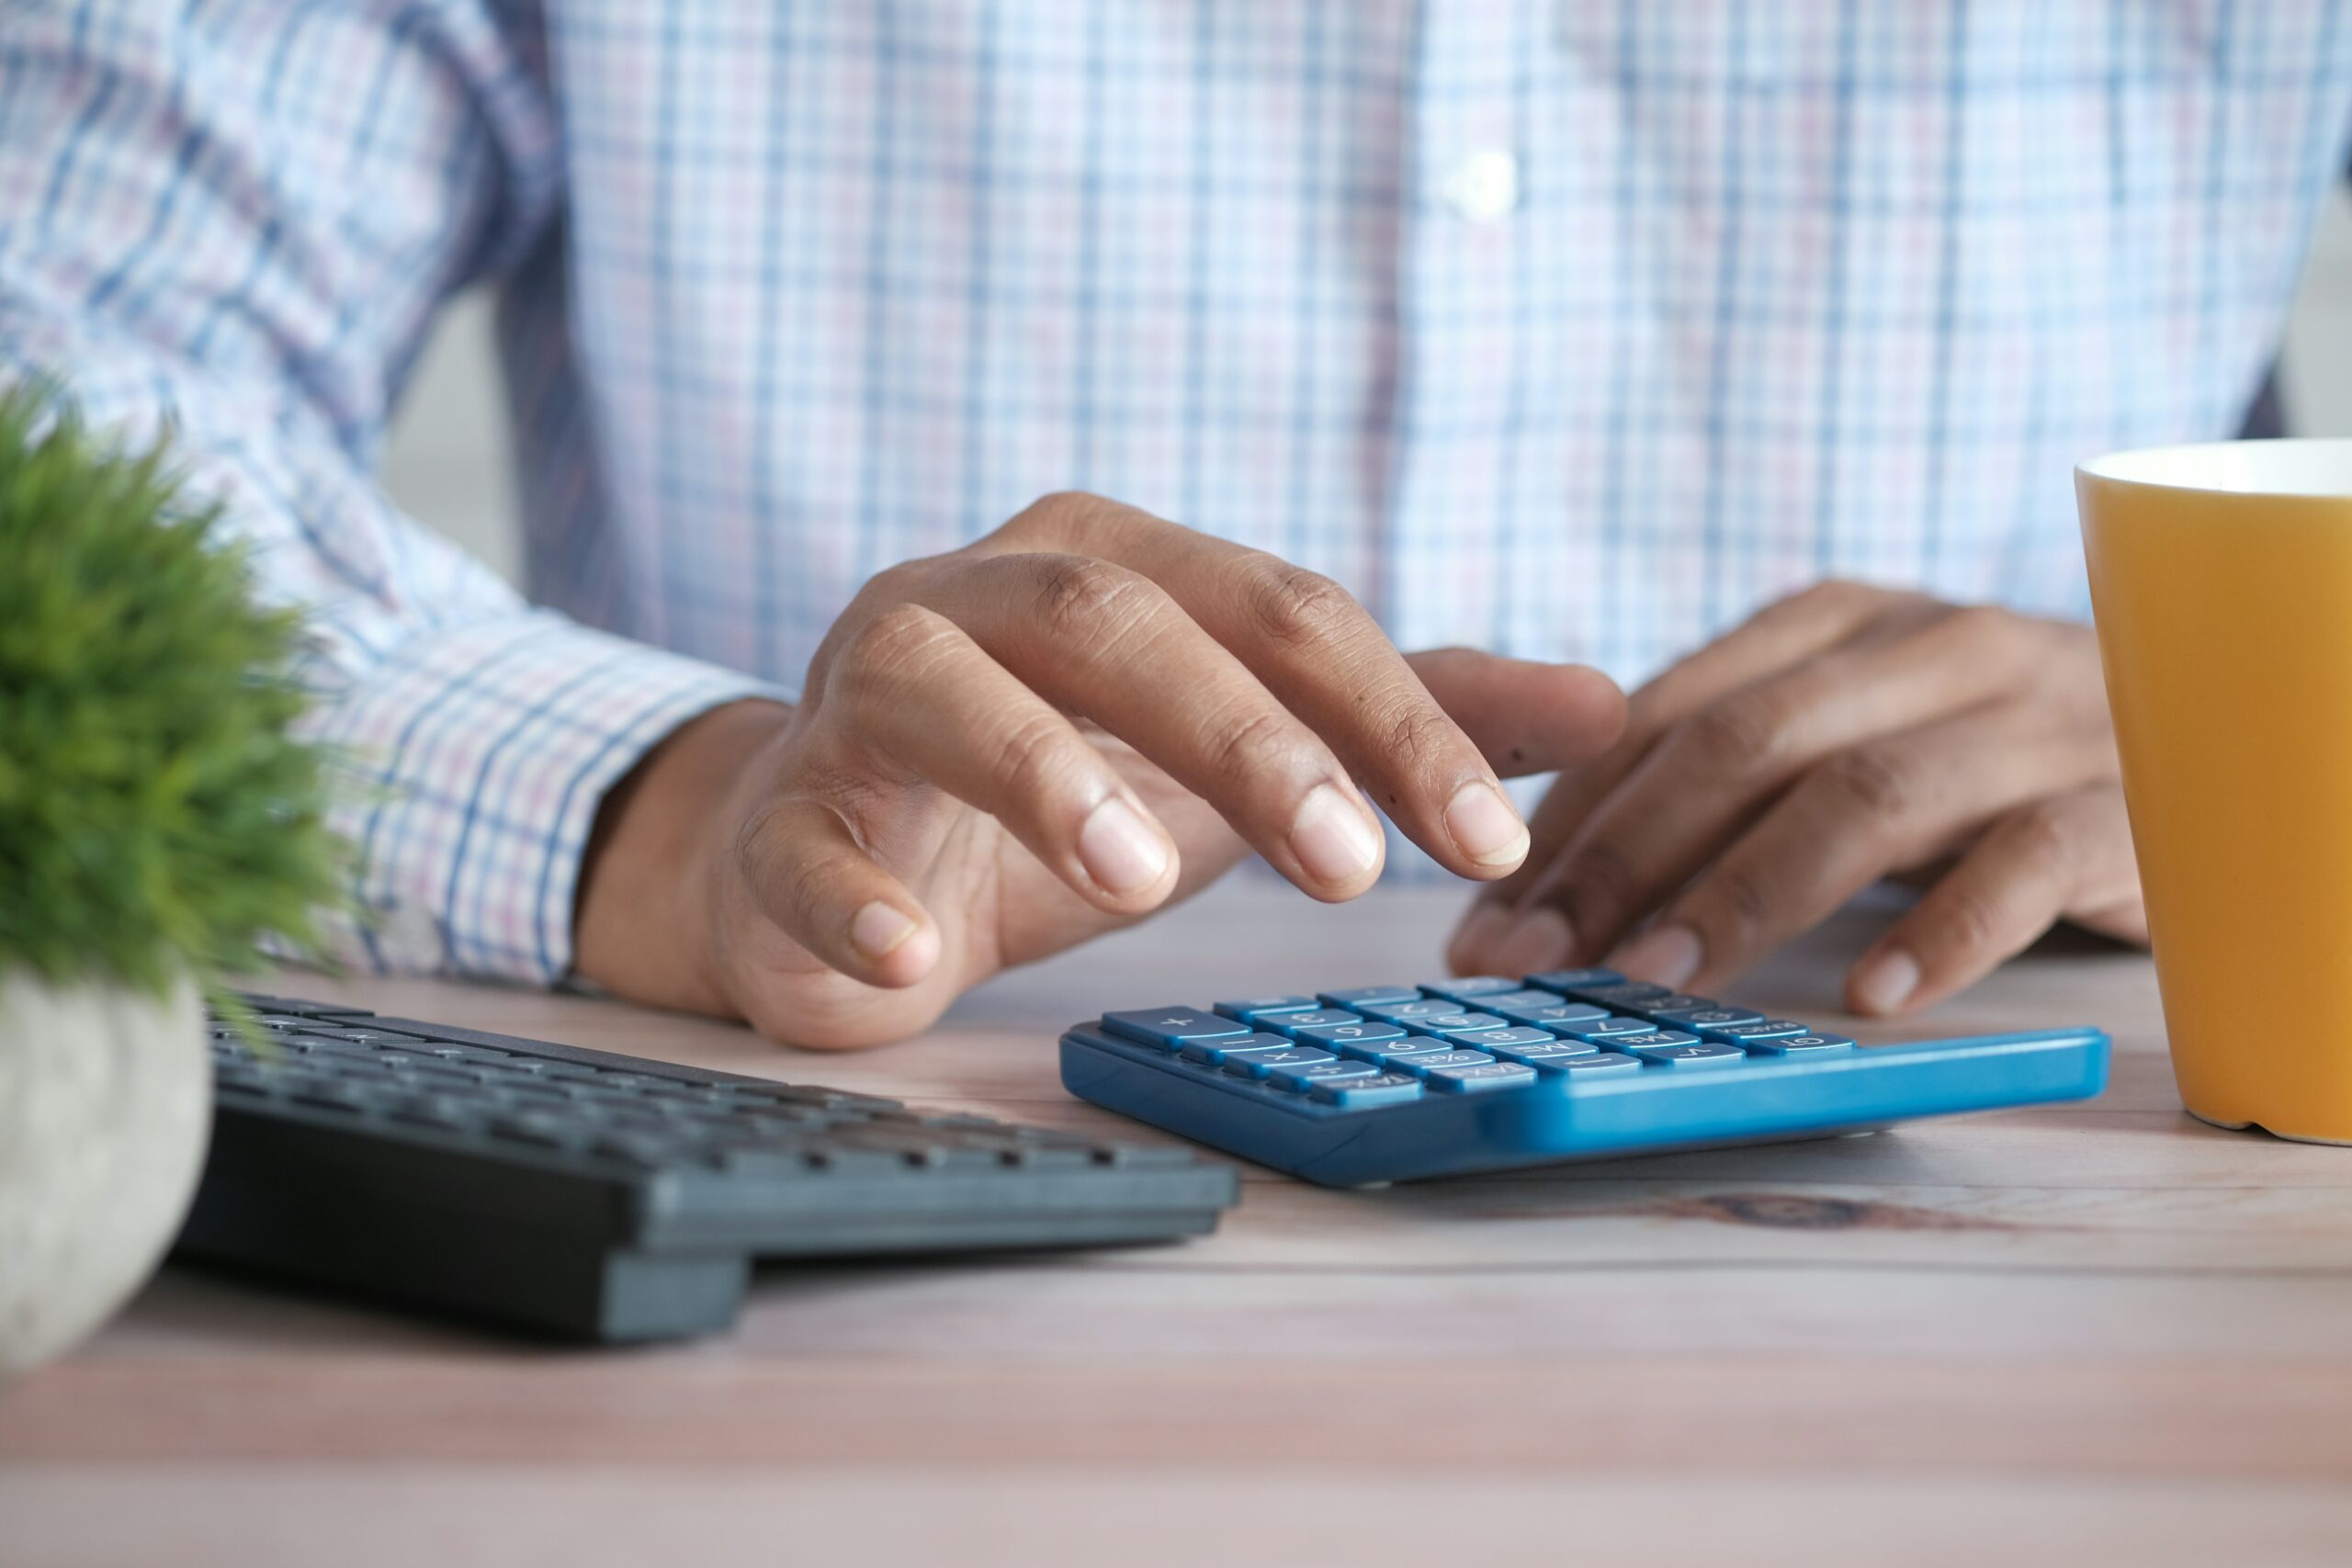 How to Calculate Your Debt-to-Income Ratio Easily